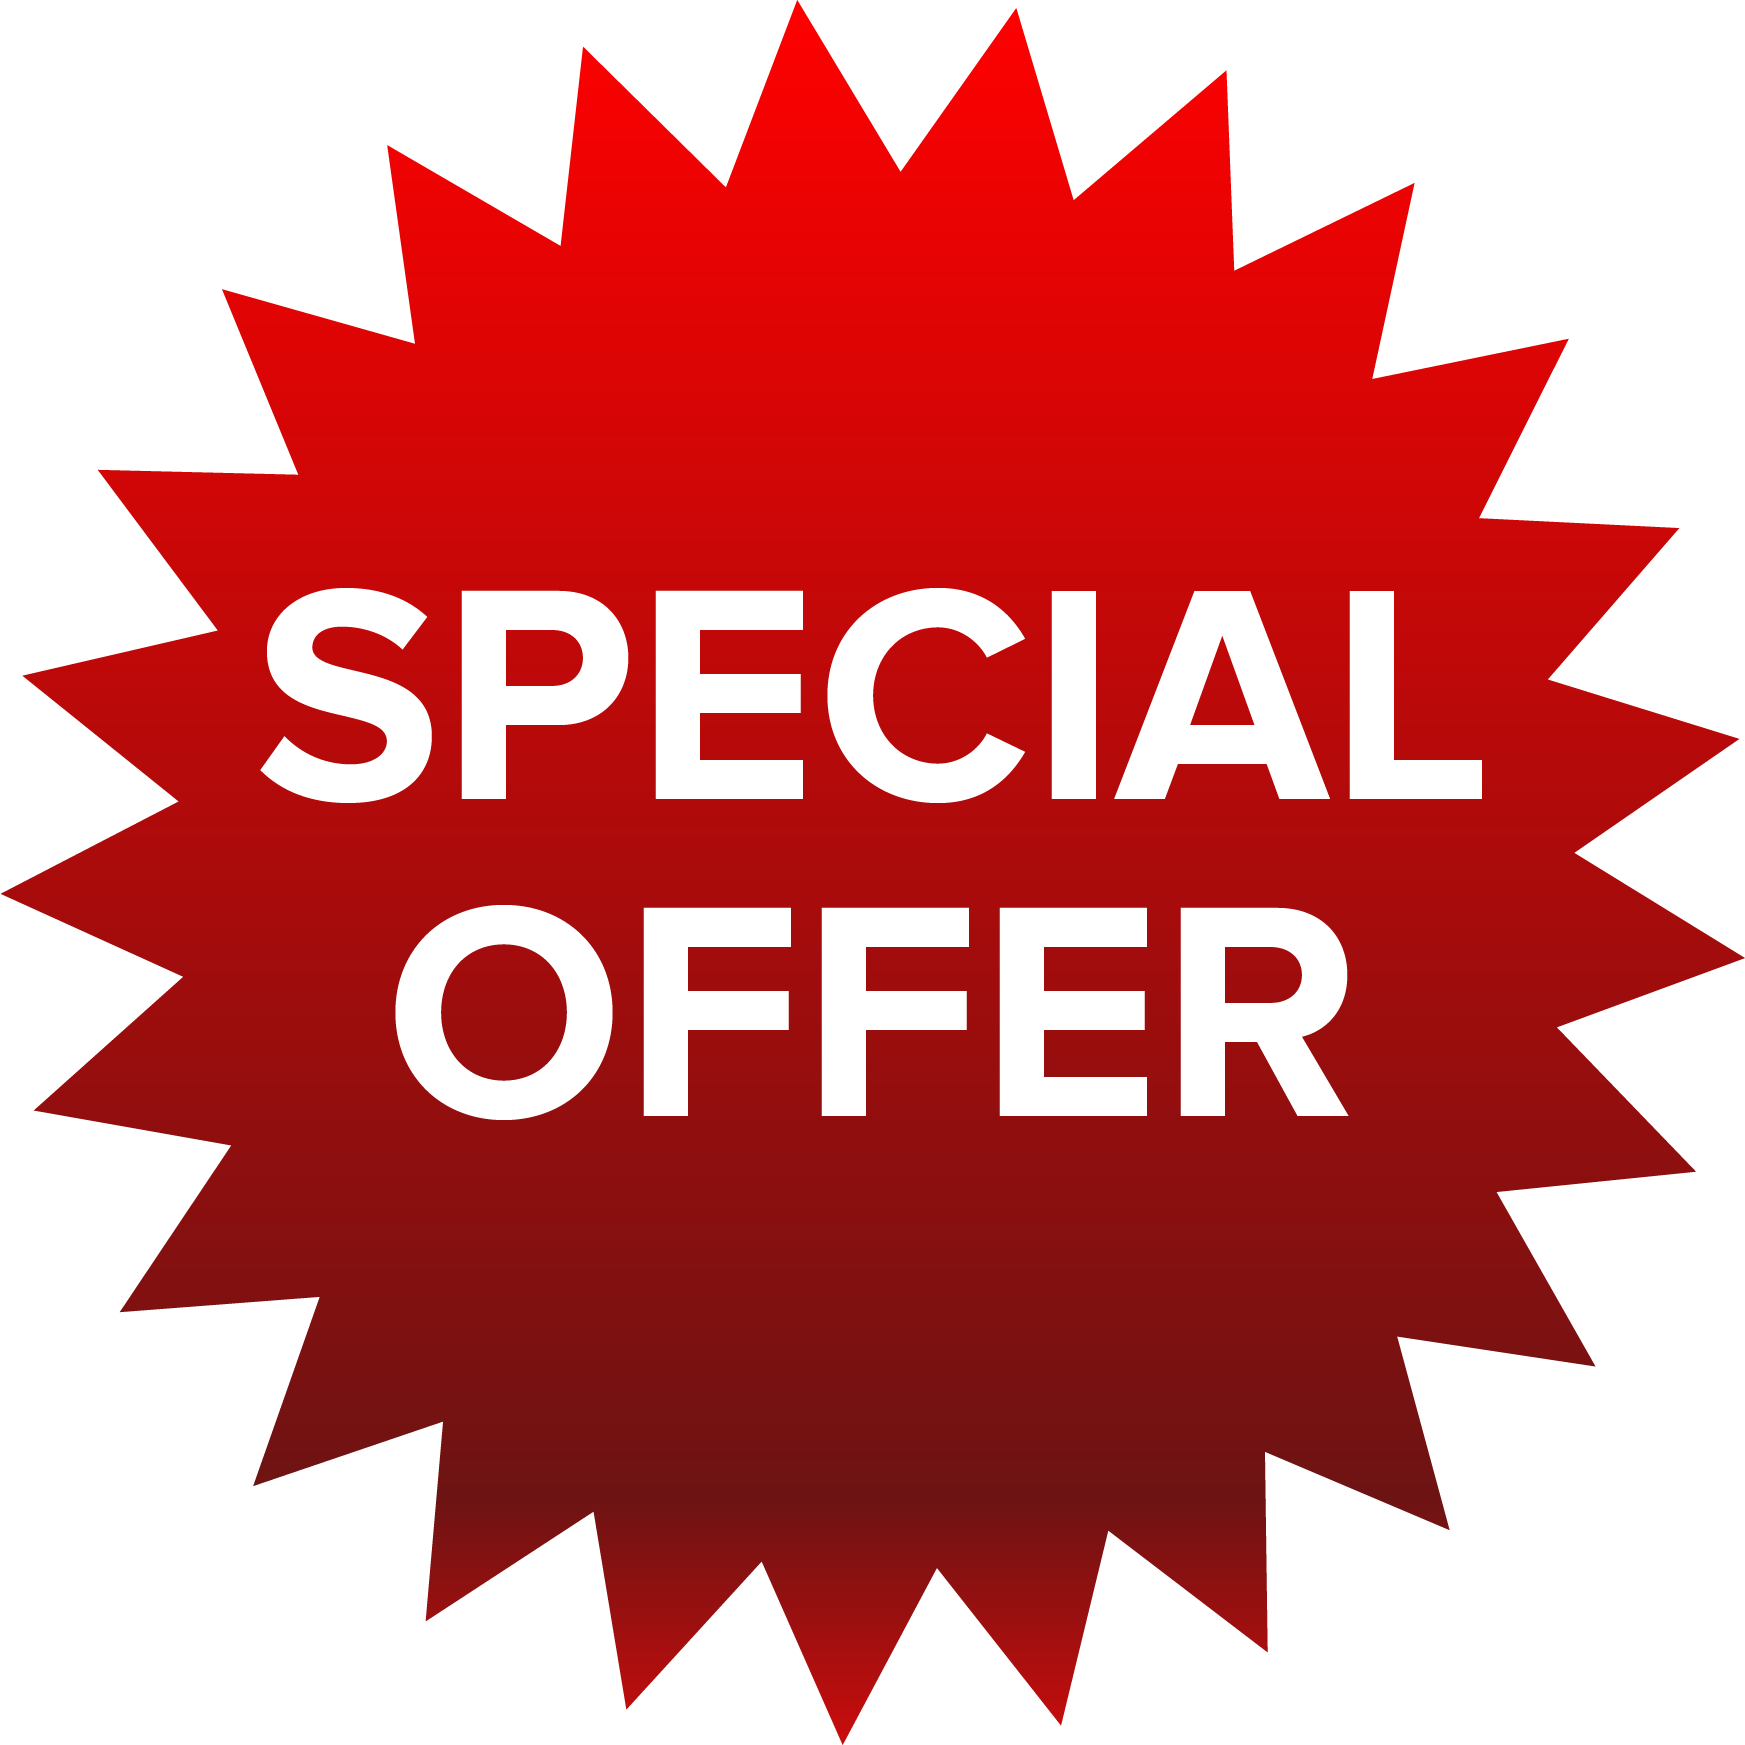 Special Offer Starburst Graphic PNG image